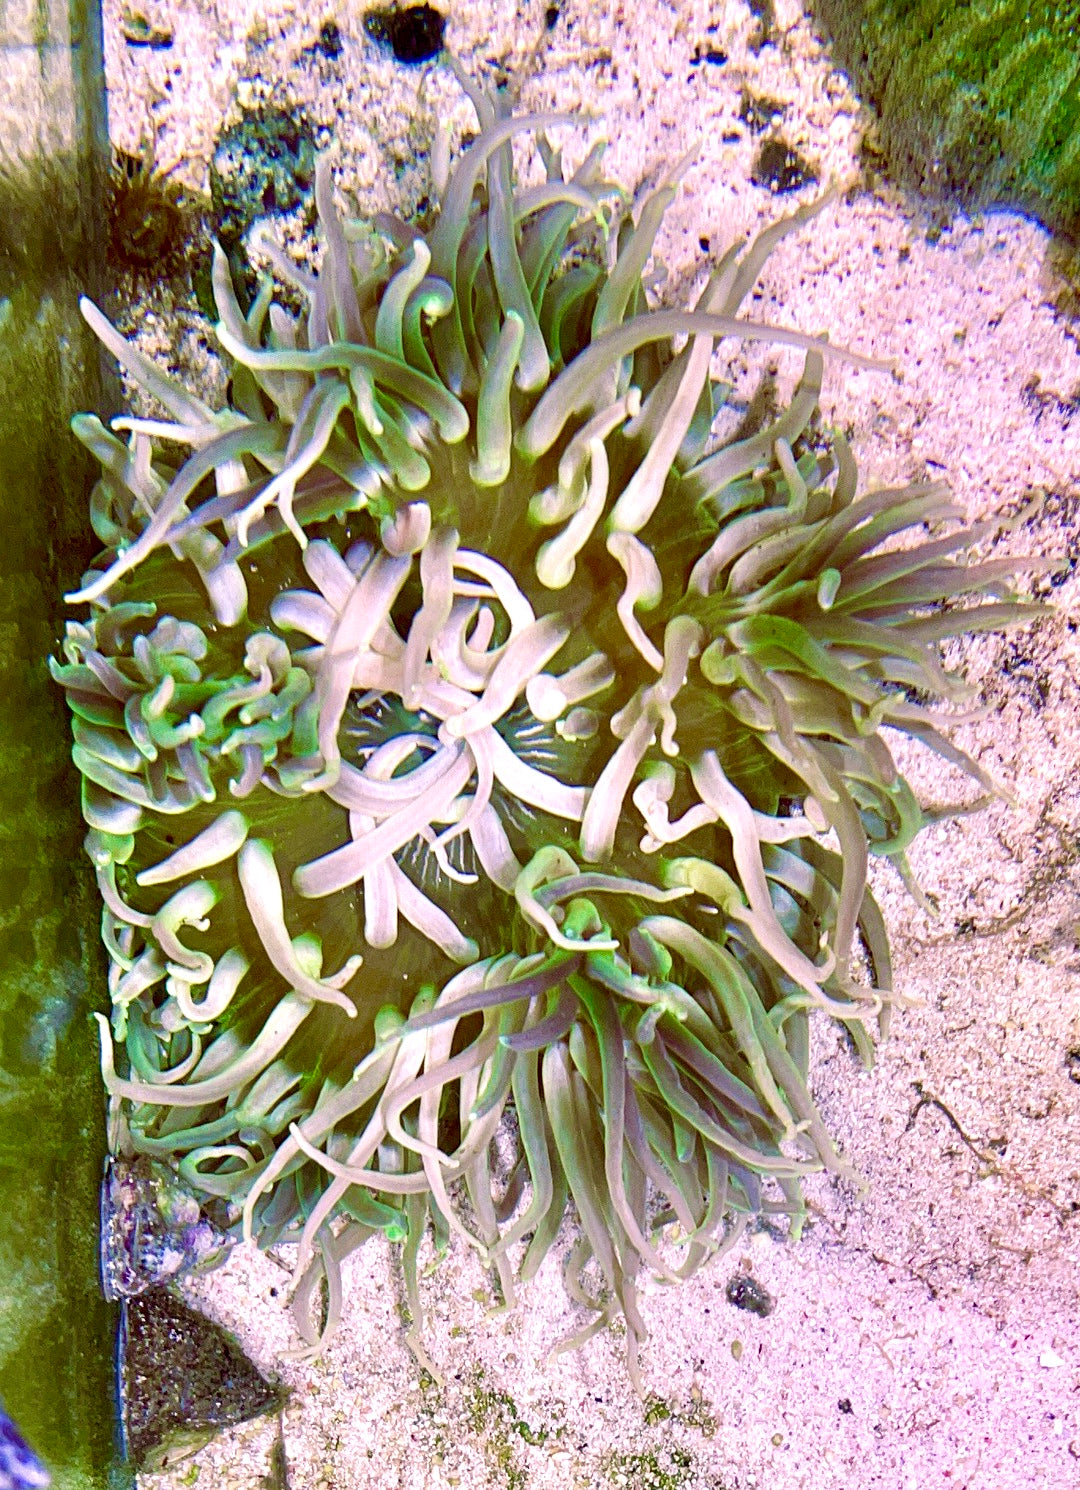 Long Tentacle Anemone Size ML: 5" to 7 "